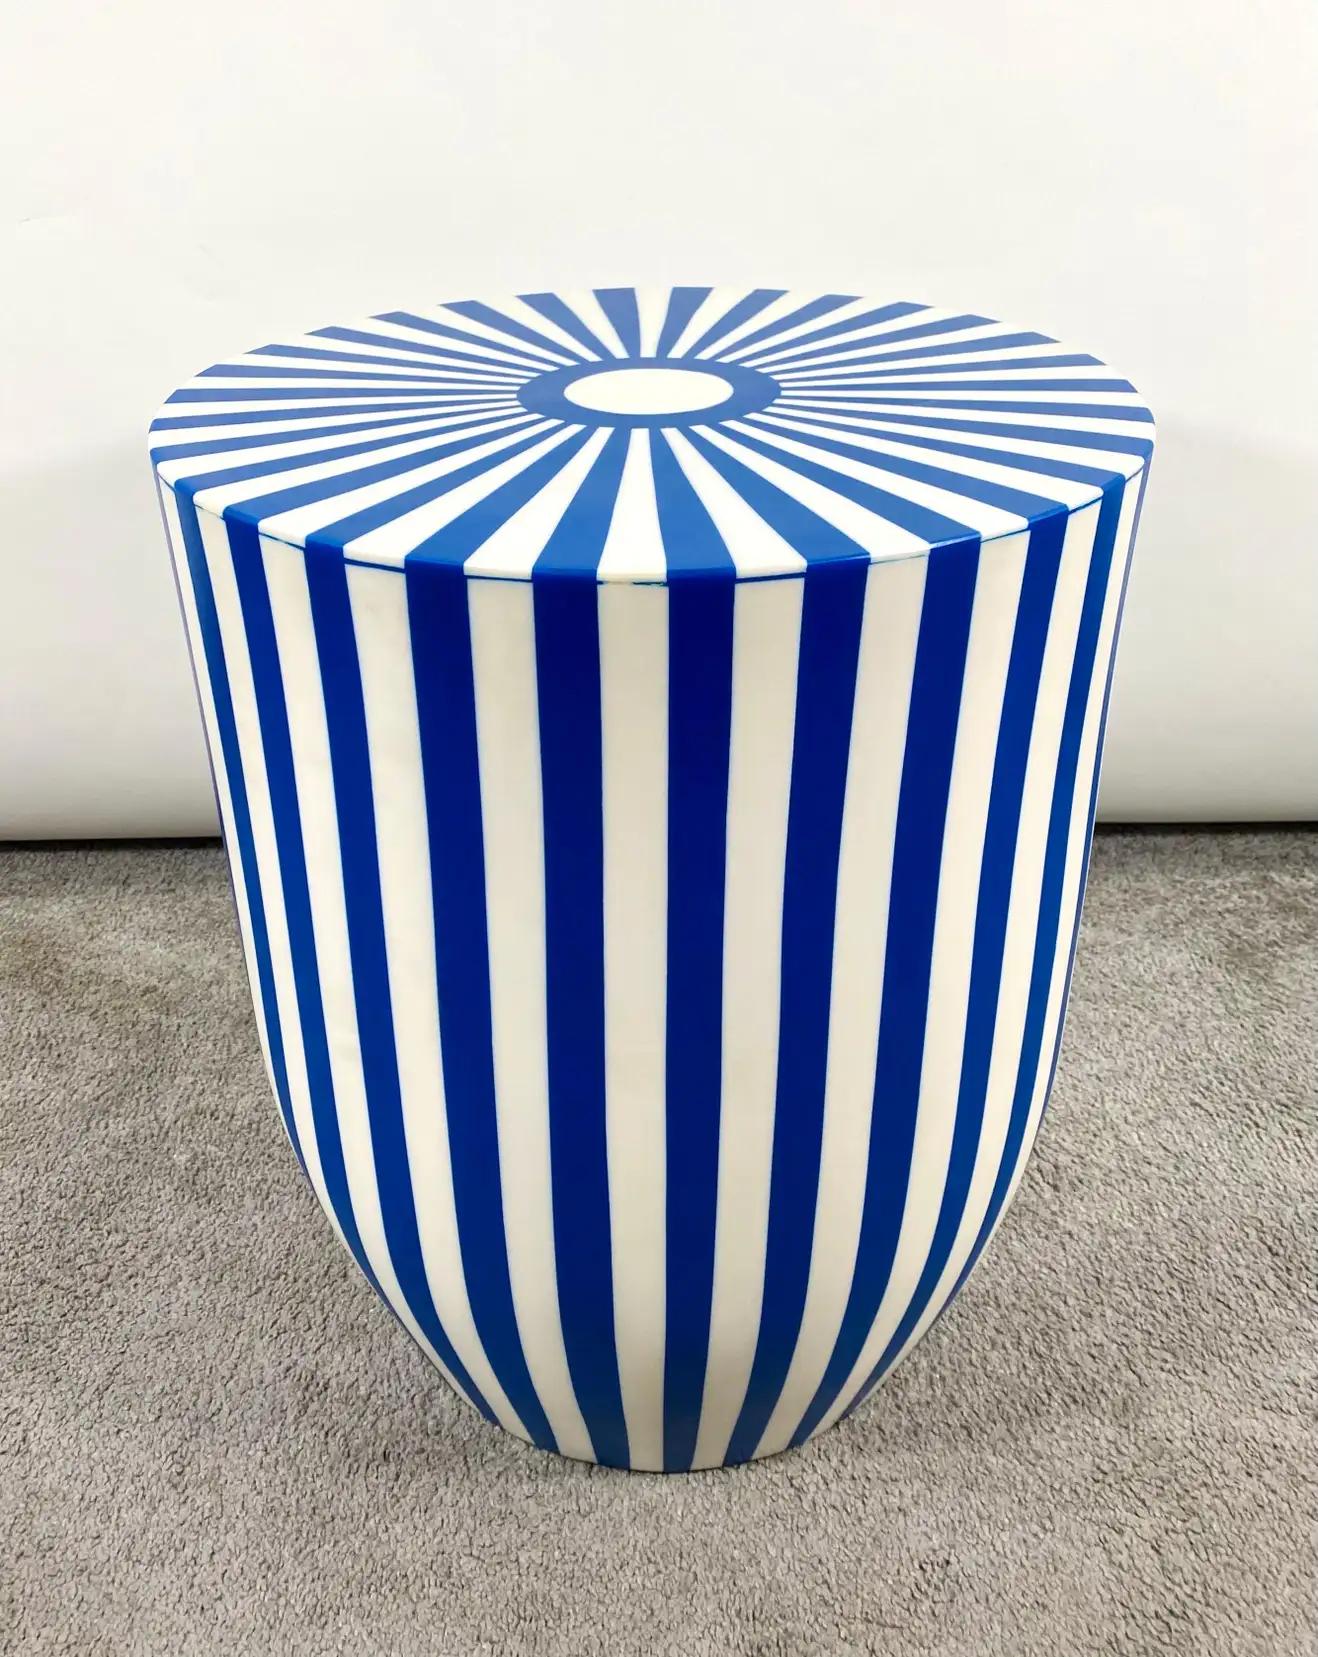 An exquisite Art Deco style blue and white side table or stool featuring a striped design. The table is made of quality resin and have a solid and sturdy structure. The sculptural cylindrical shaped table or stool has a round top and narrow base